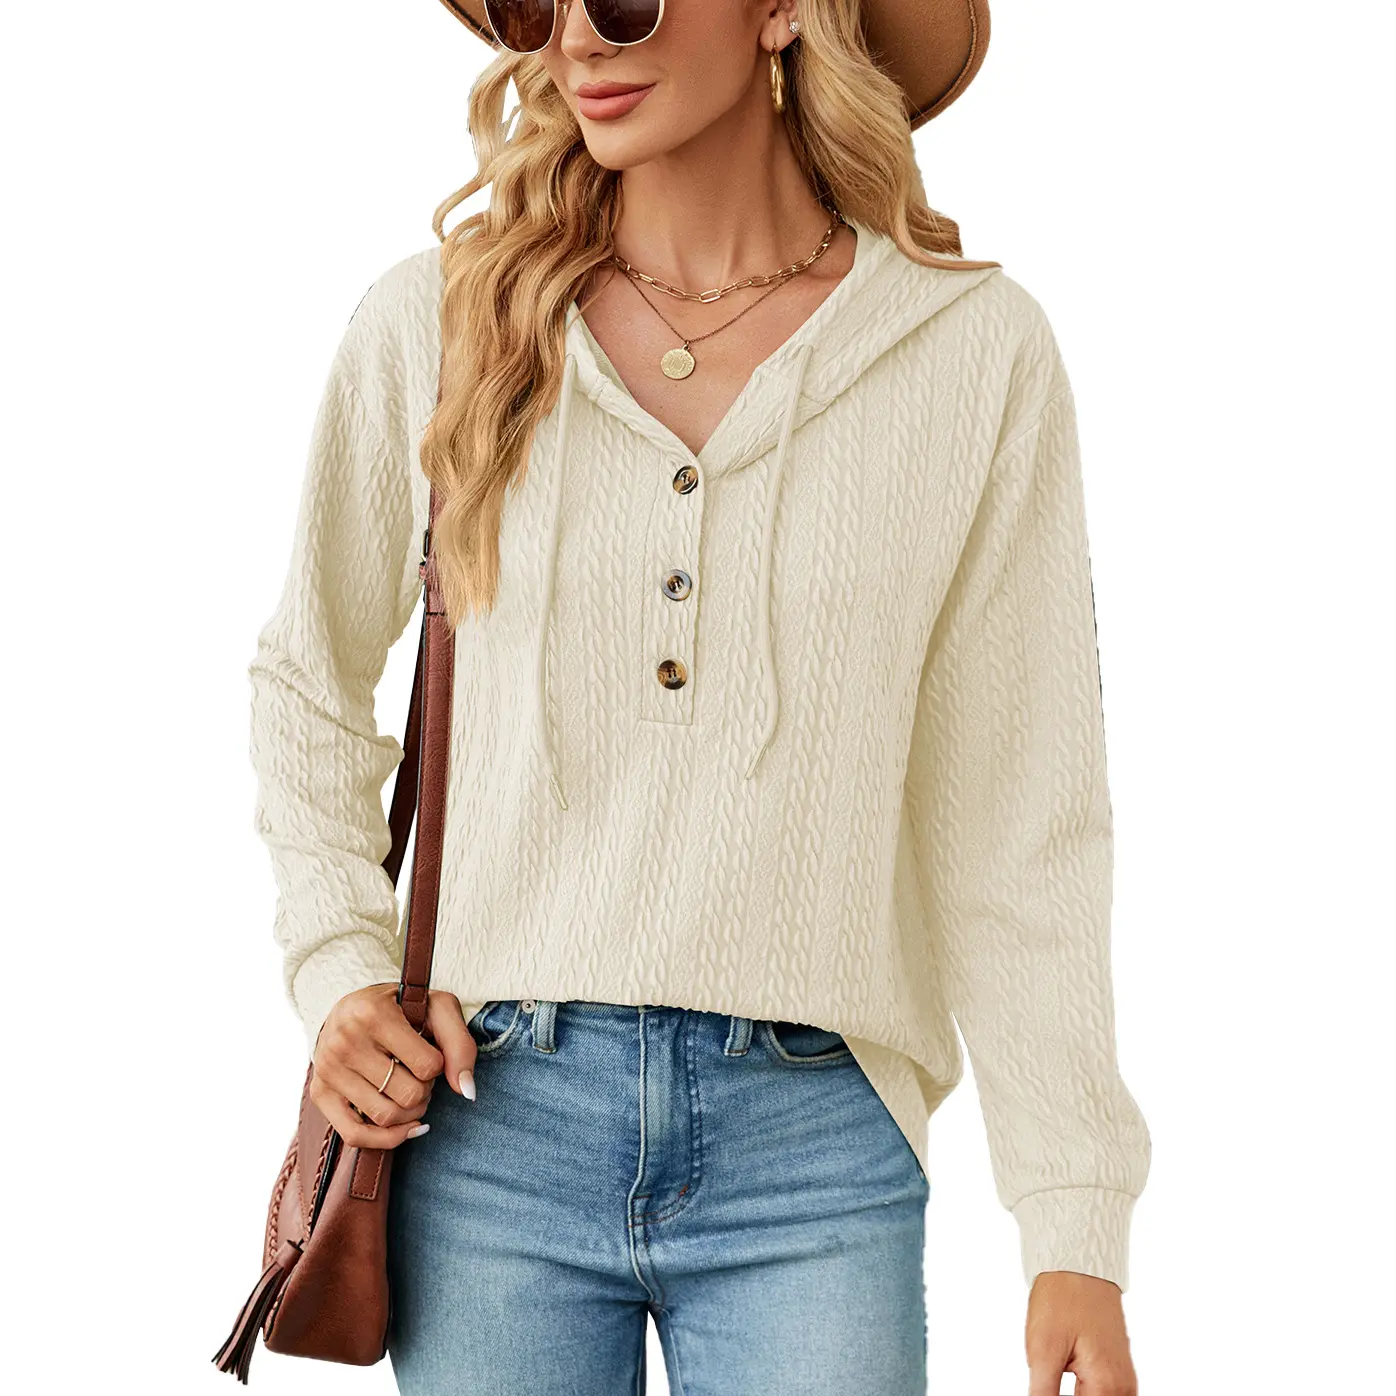 Aladal Wholesale Women's Long Sleeve V Neck Blouse with Lace Trim, Henley Tunic Tops, Casual and Stylish Blouses for Women